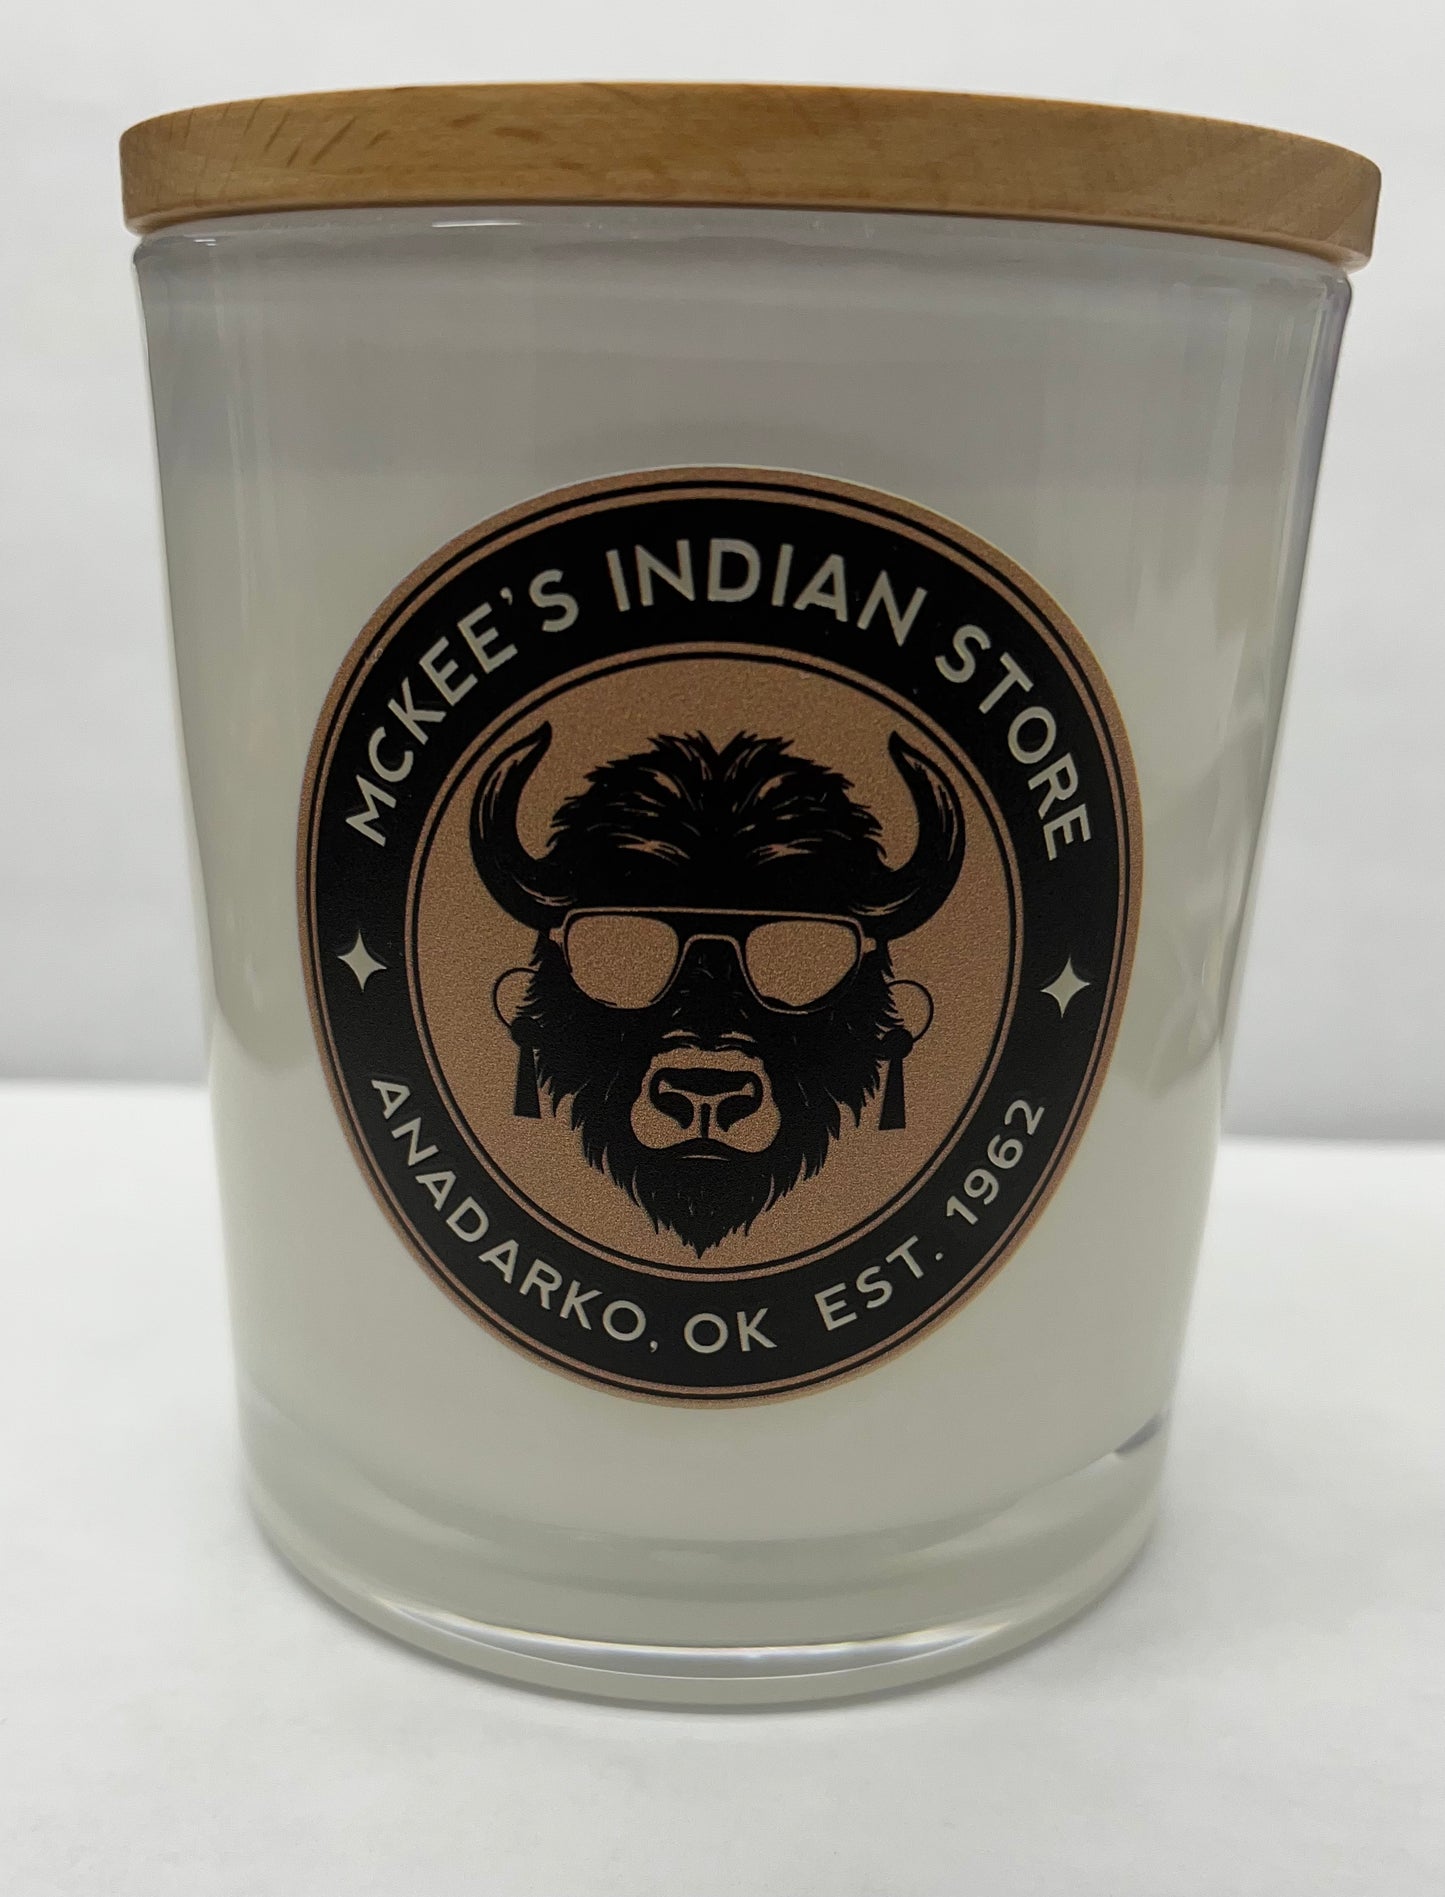 Teakwood and Tobacco Soy Candle